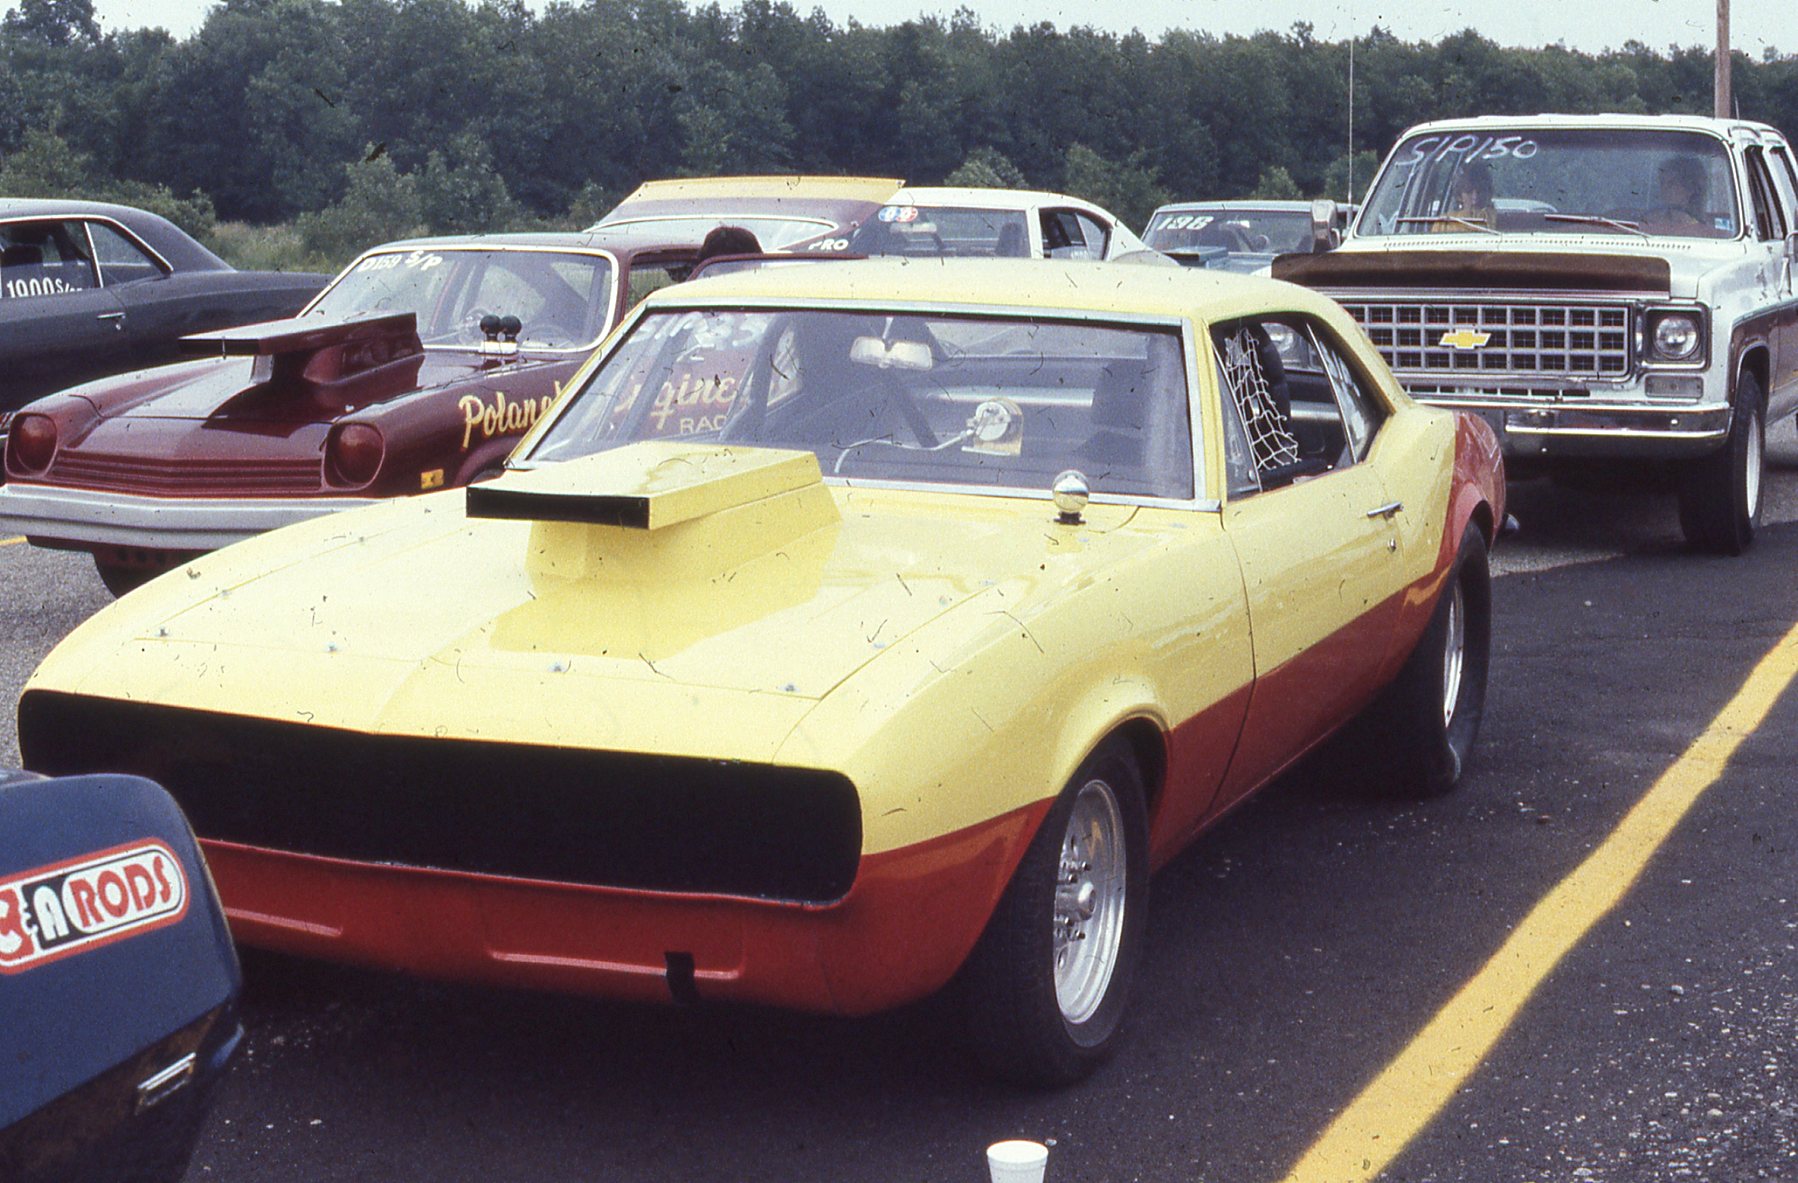 The racecar in the staging lanes